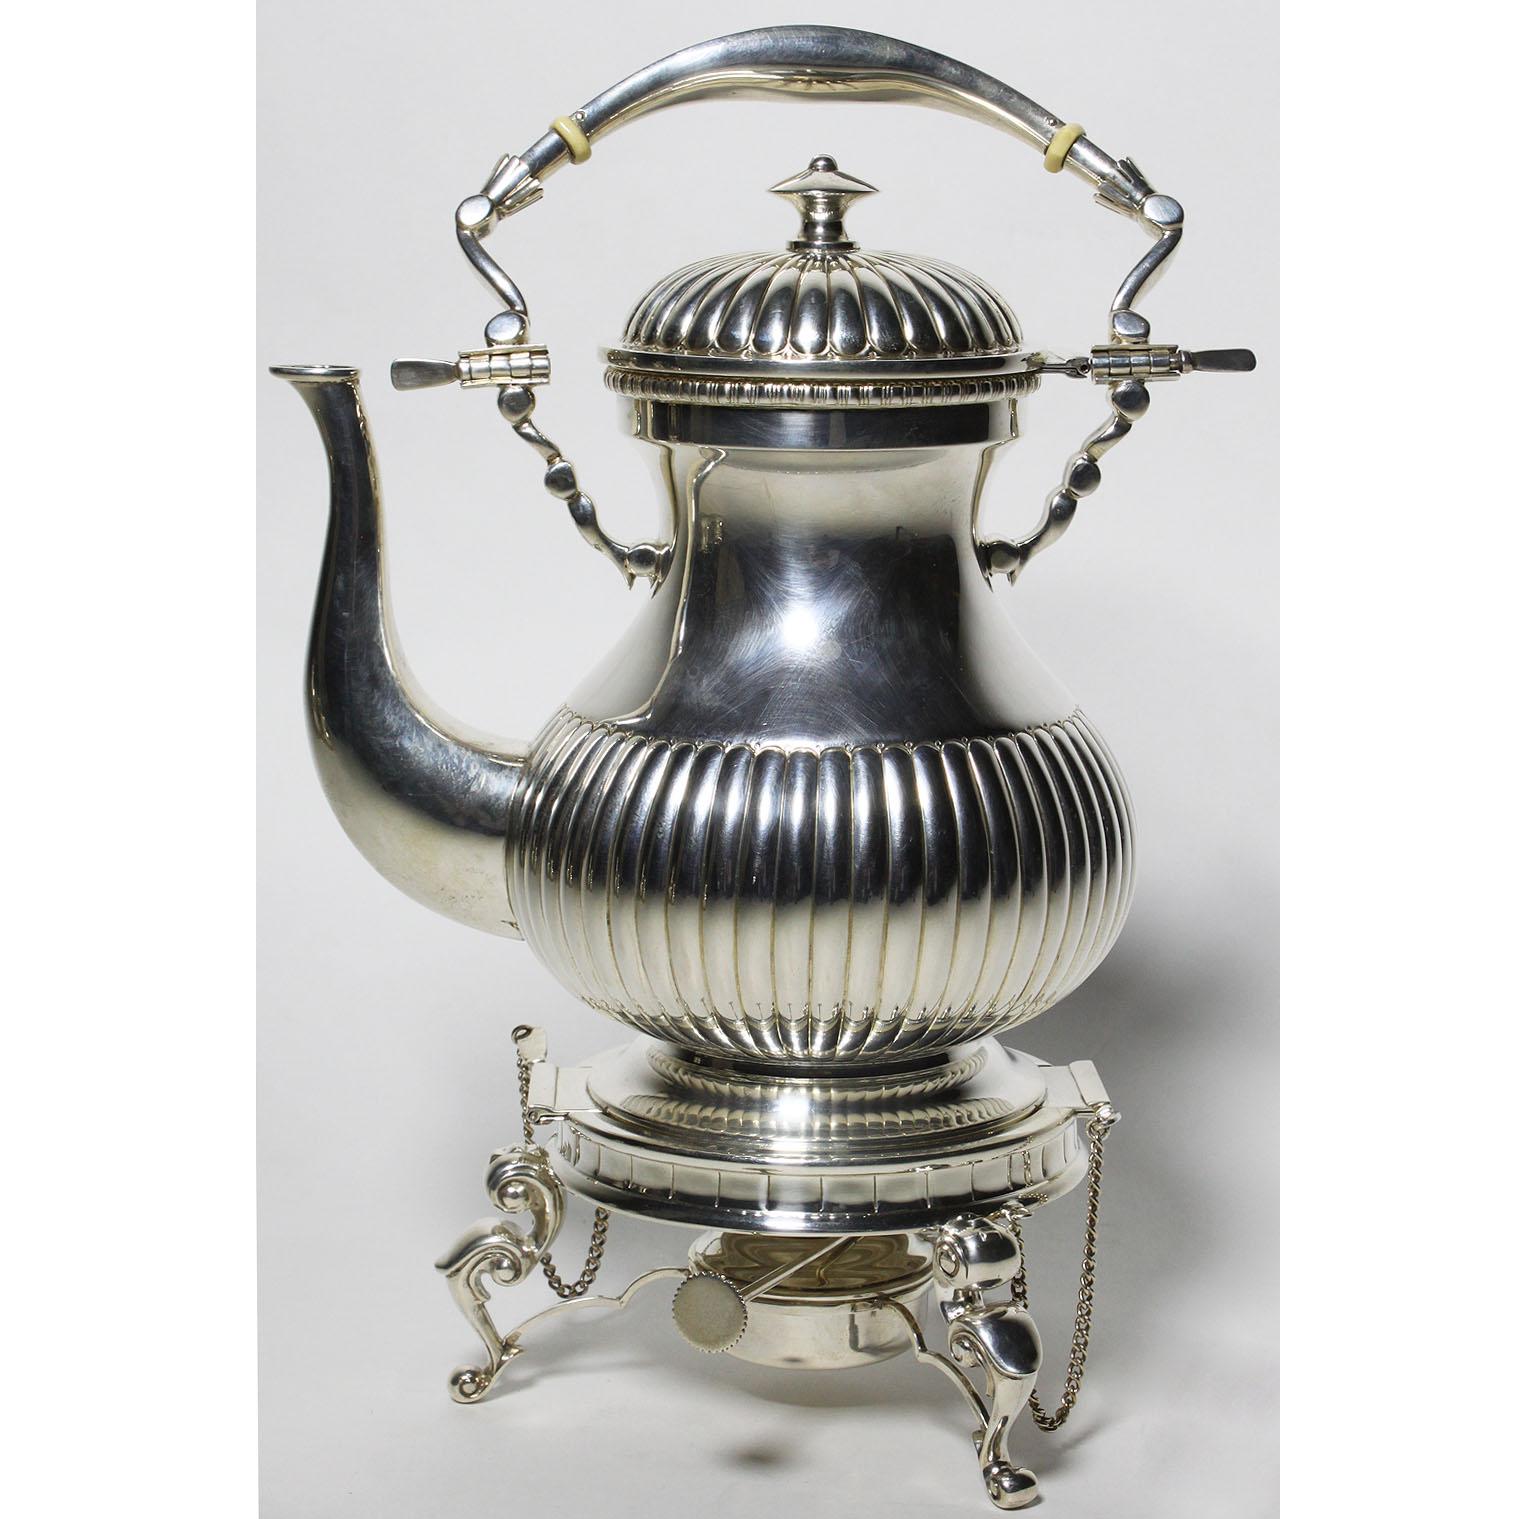 A very fine early 20th century five-piece Louis XV style sterling silver tea and coffee service set. The finely chased ovoid shaped body with scalloped details and vermeil gold interior, comprising of a large hot-water samovar kettle on a tilt-stand